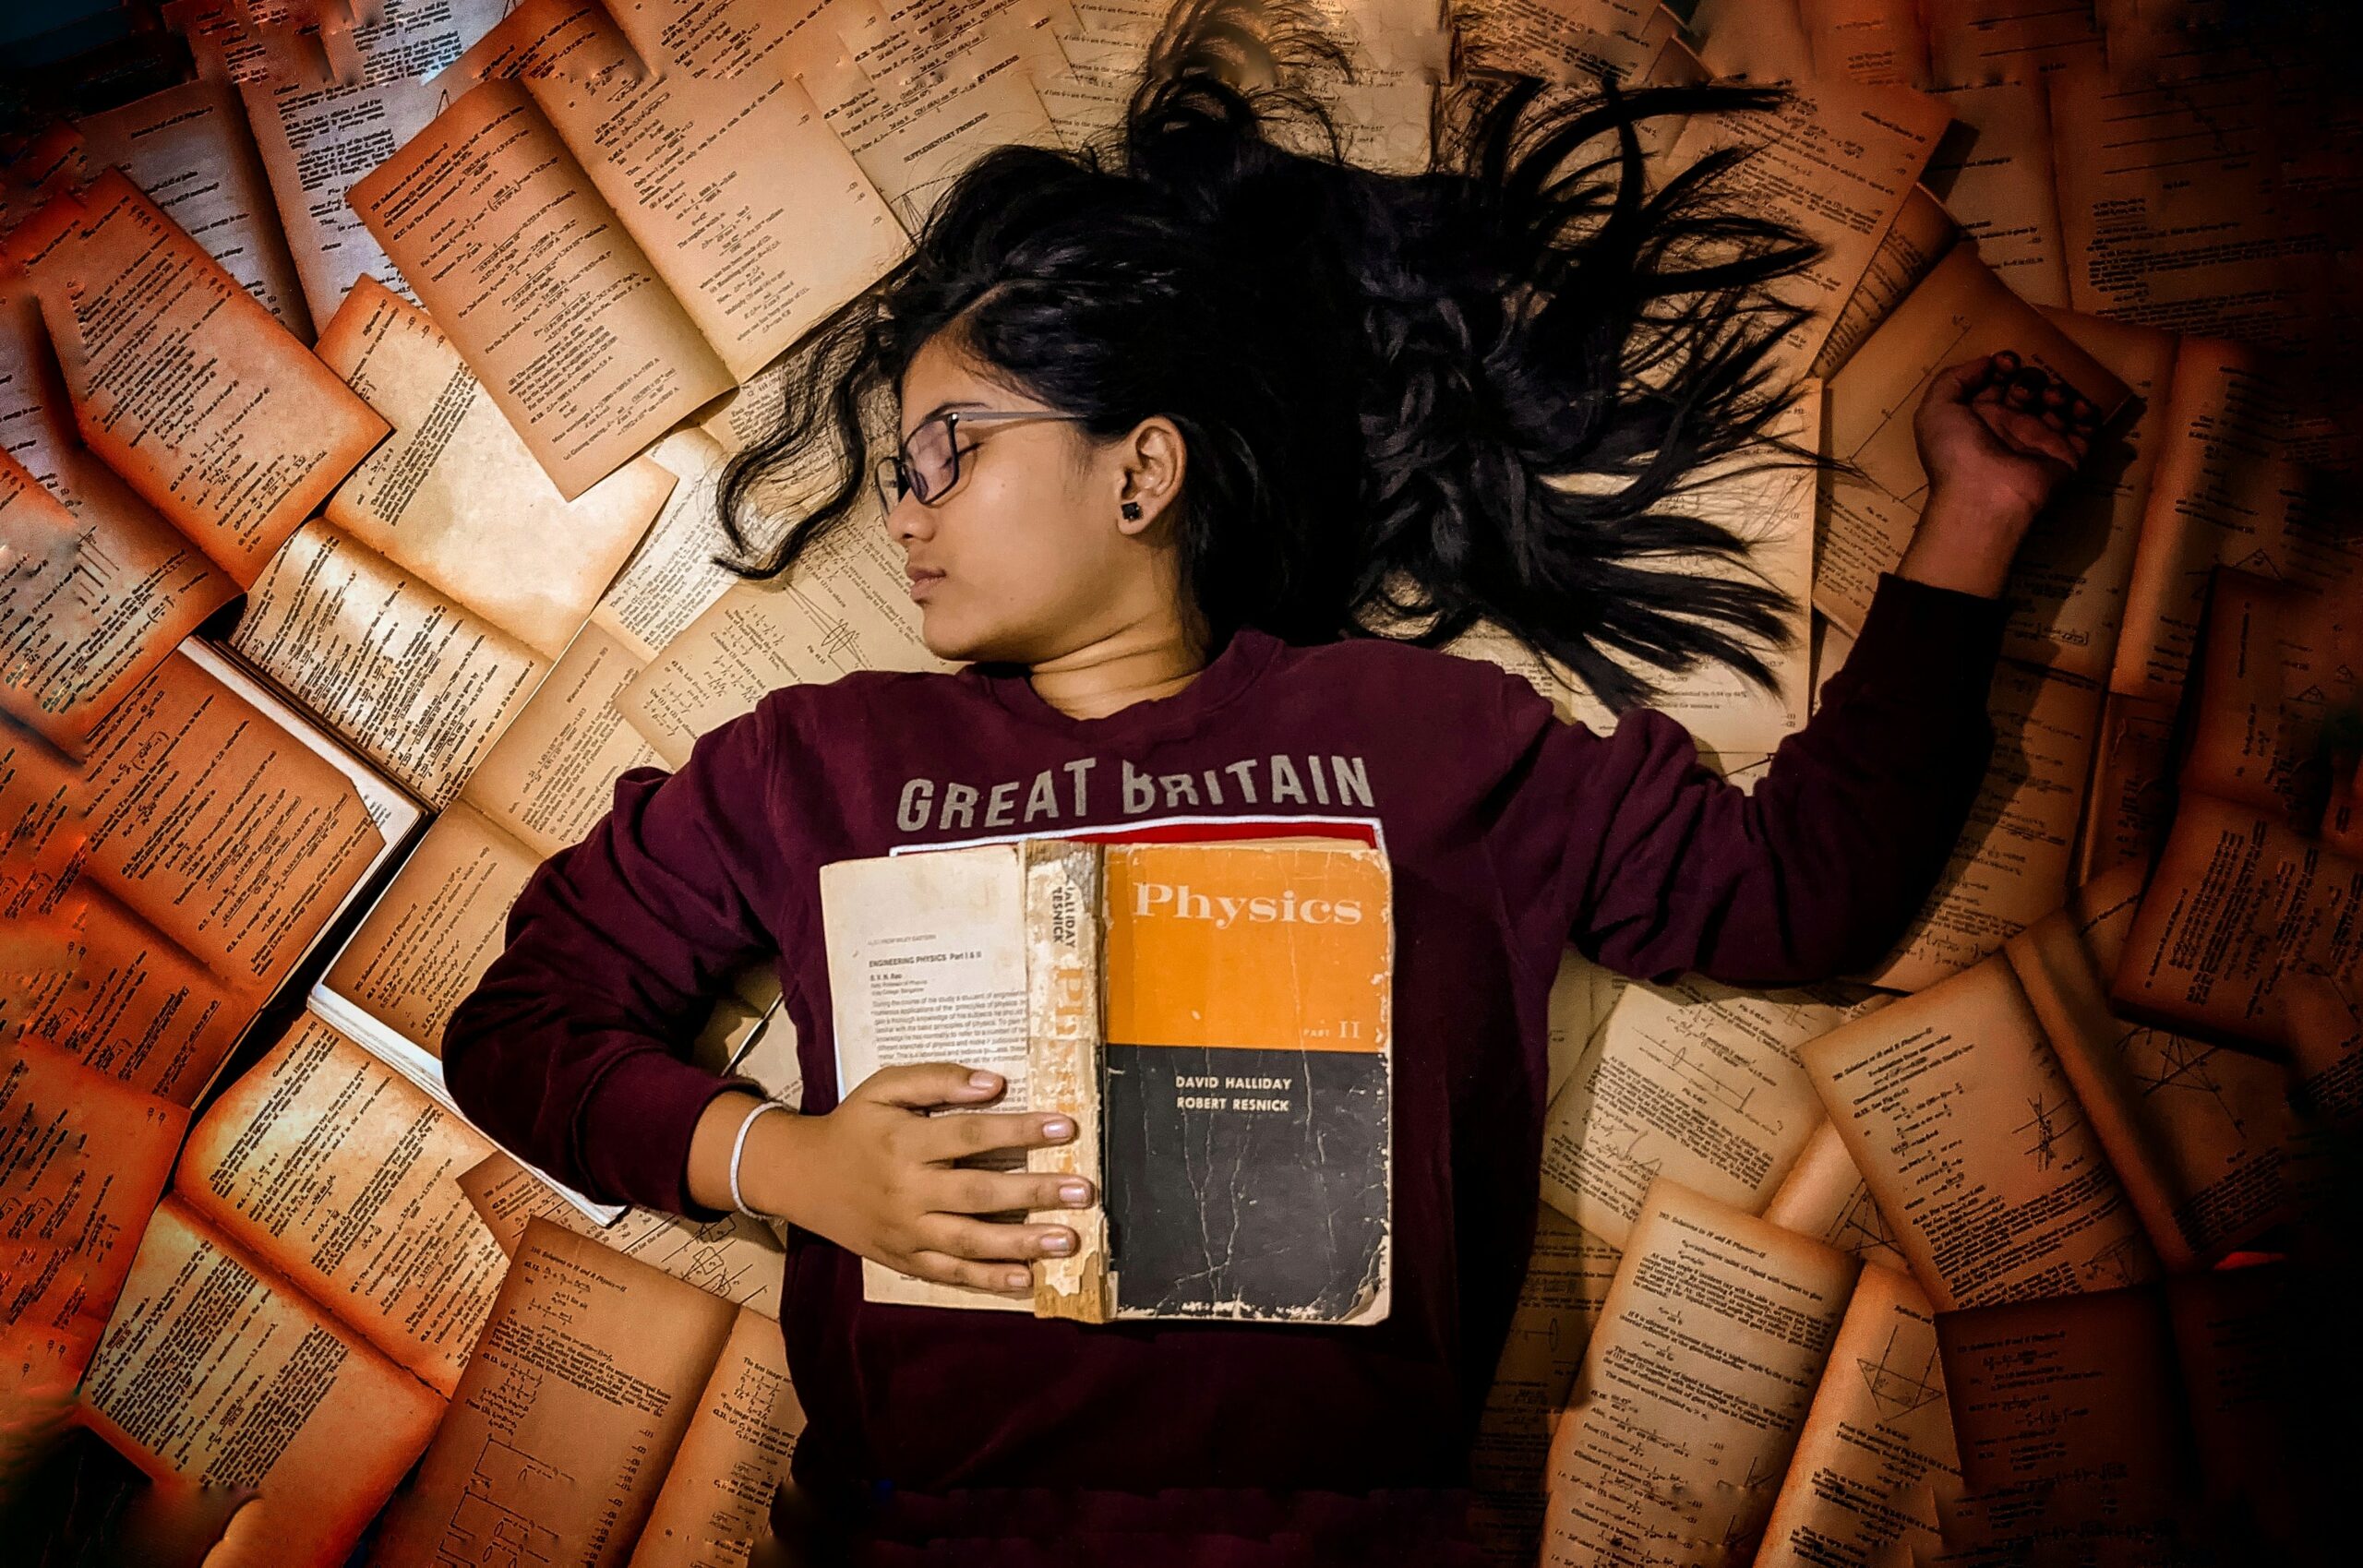 A person with long black hair asleep in a pile of books with one open across her chest